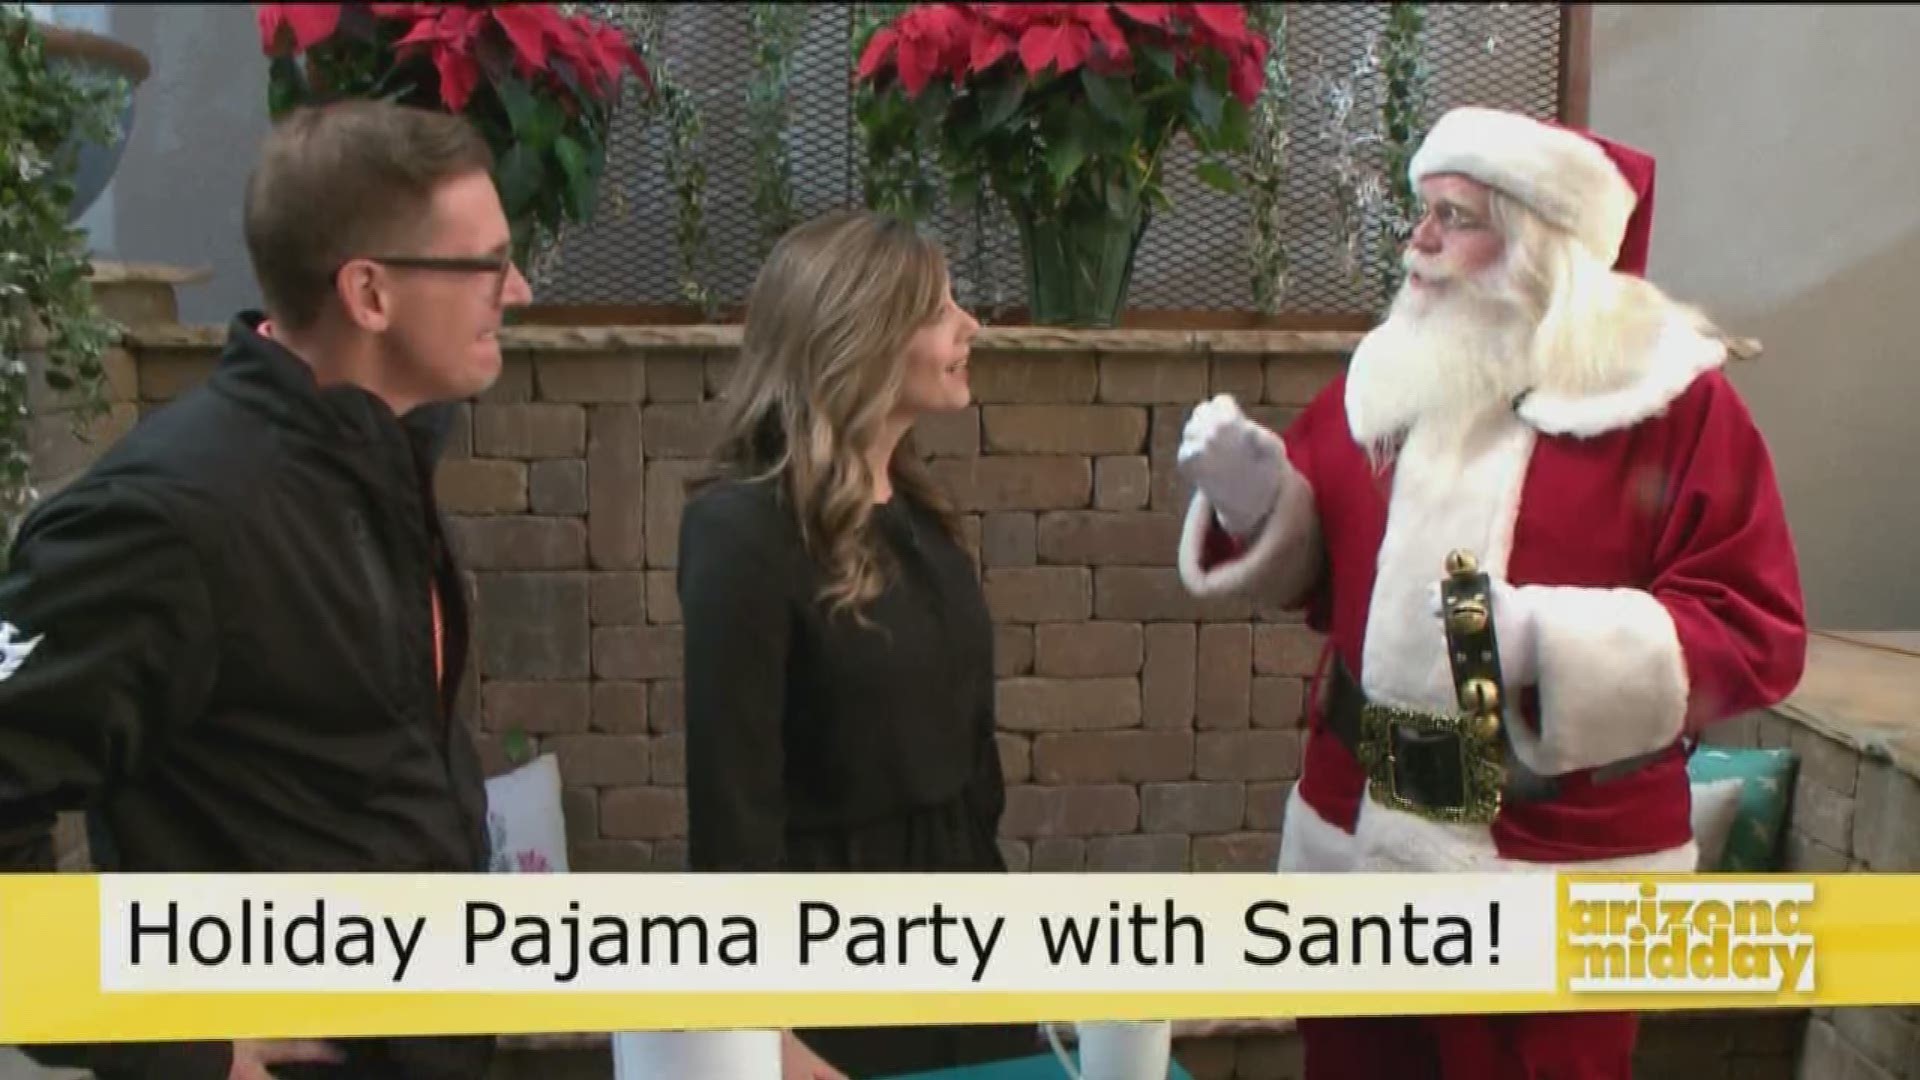 R.J. Price and a special guest tell us about how the kids can meet Santa and watch movies in the Park!